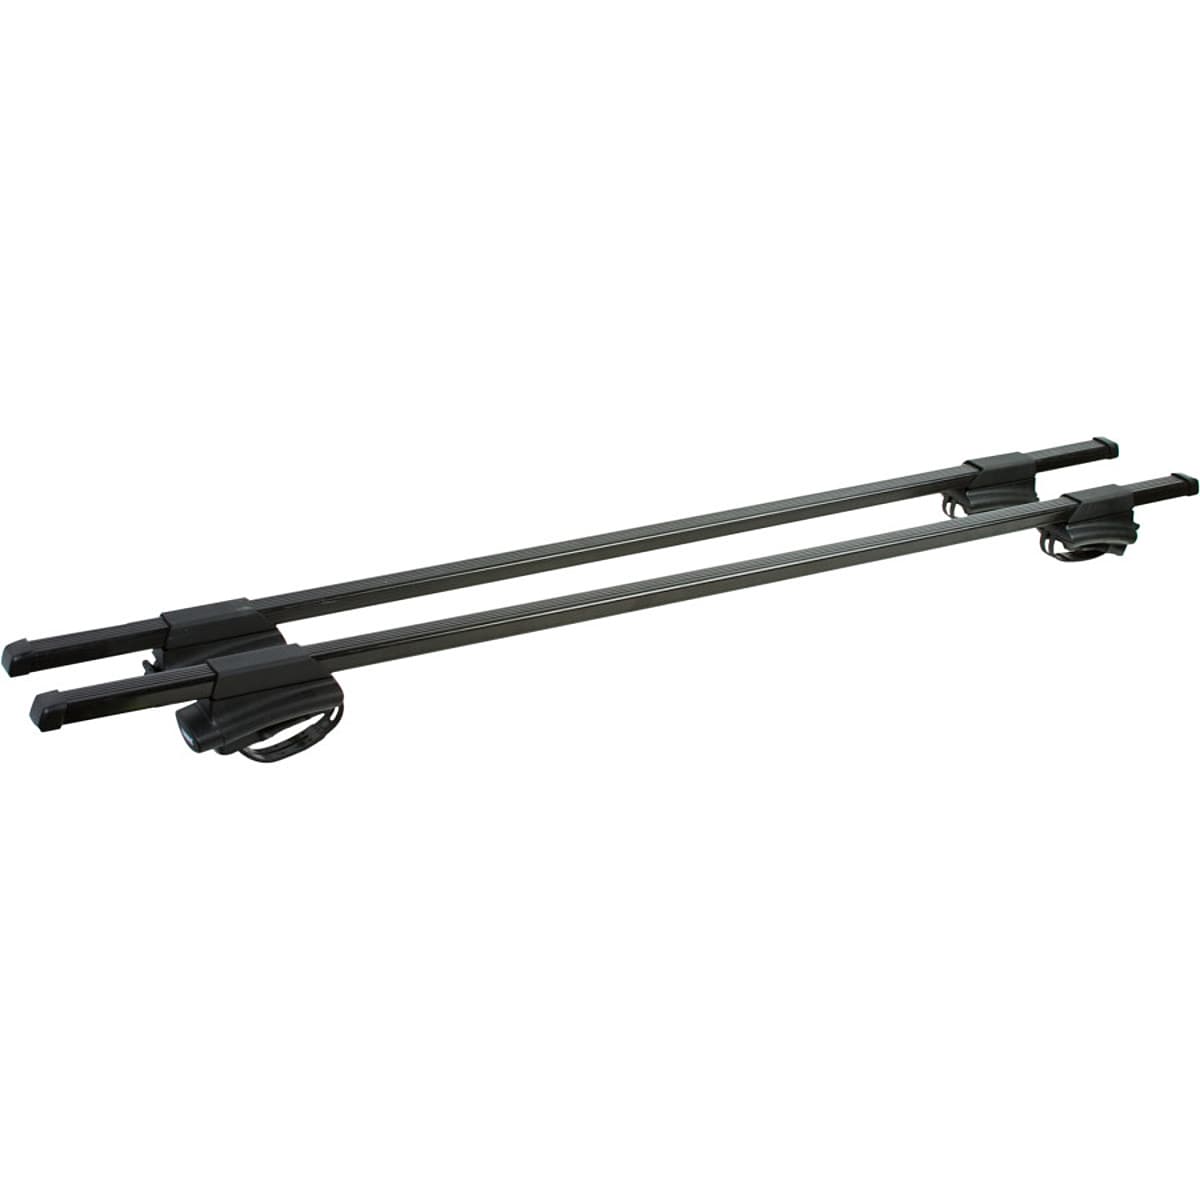 Thule Complete CrossRoad System